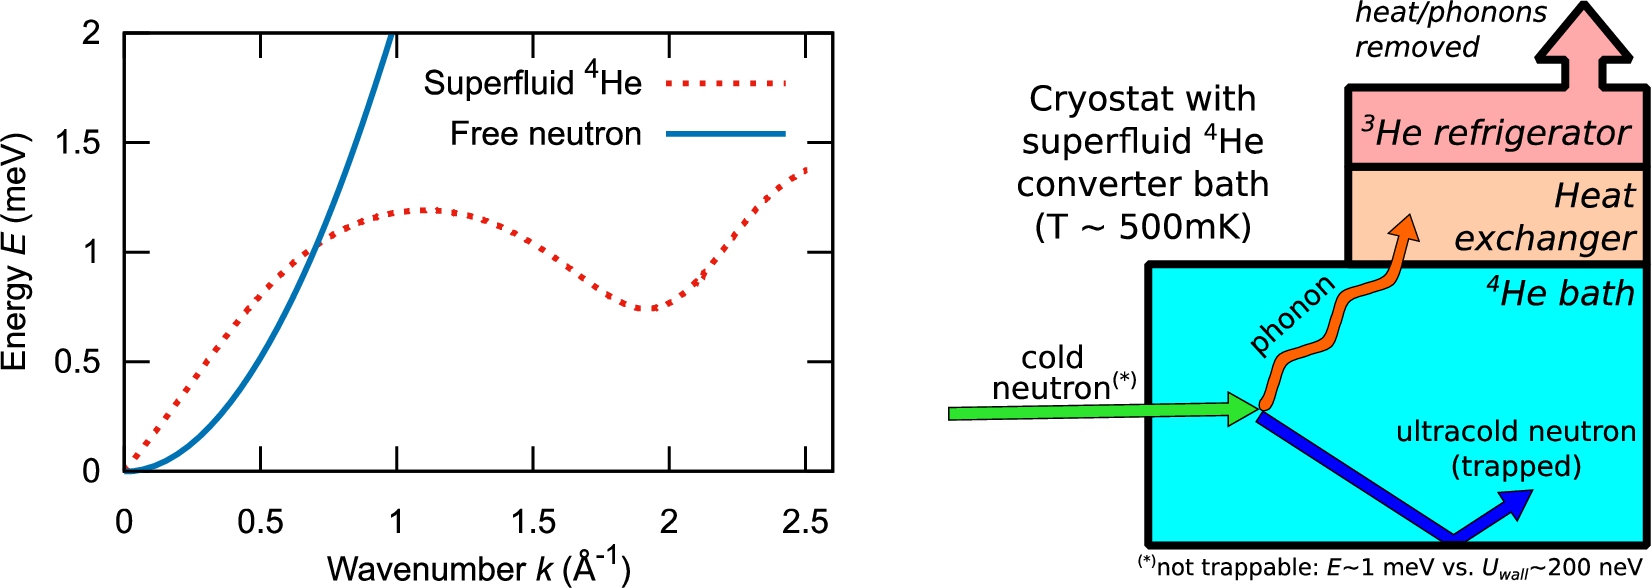 Superthermal UCN production in superfluid 4He. The plot (left) overlays the dispersion relations for free neutrons, and for superfluid 4He at zero pressure using data from reference [16]. Neutrons with momentum ℏk and energy E=ℏ2k2/(2mn) can scatter inelastically in the superfluid (schematically illustrated at right), producing elementary excitations (mainly phonons) that carry away energy and momentum according to the superfluid 4He dispersion relation. Neutrons whose residual energy after this interaction is sufficiently close to zero become UCN, remaining confined inside the helium vessel: this is especially important for neutrons with (k,E)∼(0.7 Å−1,1 meV). The maximum UCN energy is determined by the wall potential, which may be in the range of a few ×100 neV for a judicious choice of materials and/or application of magnetic fields. Note that the minimum of the neutron dispersion curve is offset from zero by the neutron-optical potential of superfluid 4He, V4He≈18.5 neV, which is negligible on the vertical scale of the plot.